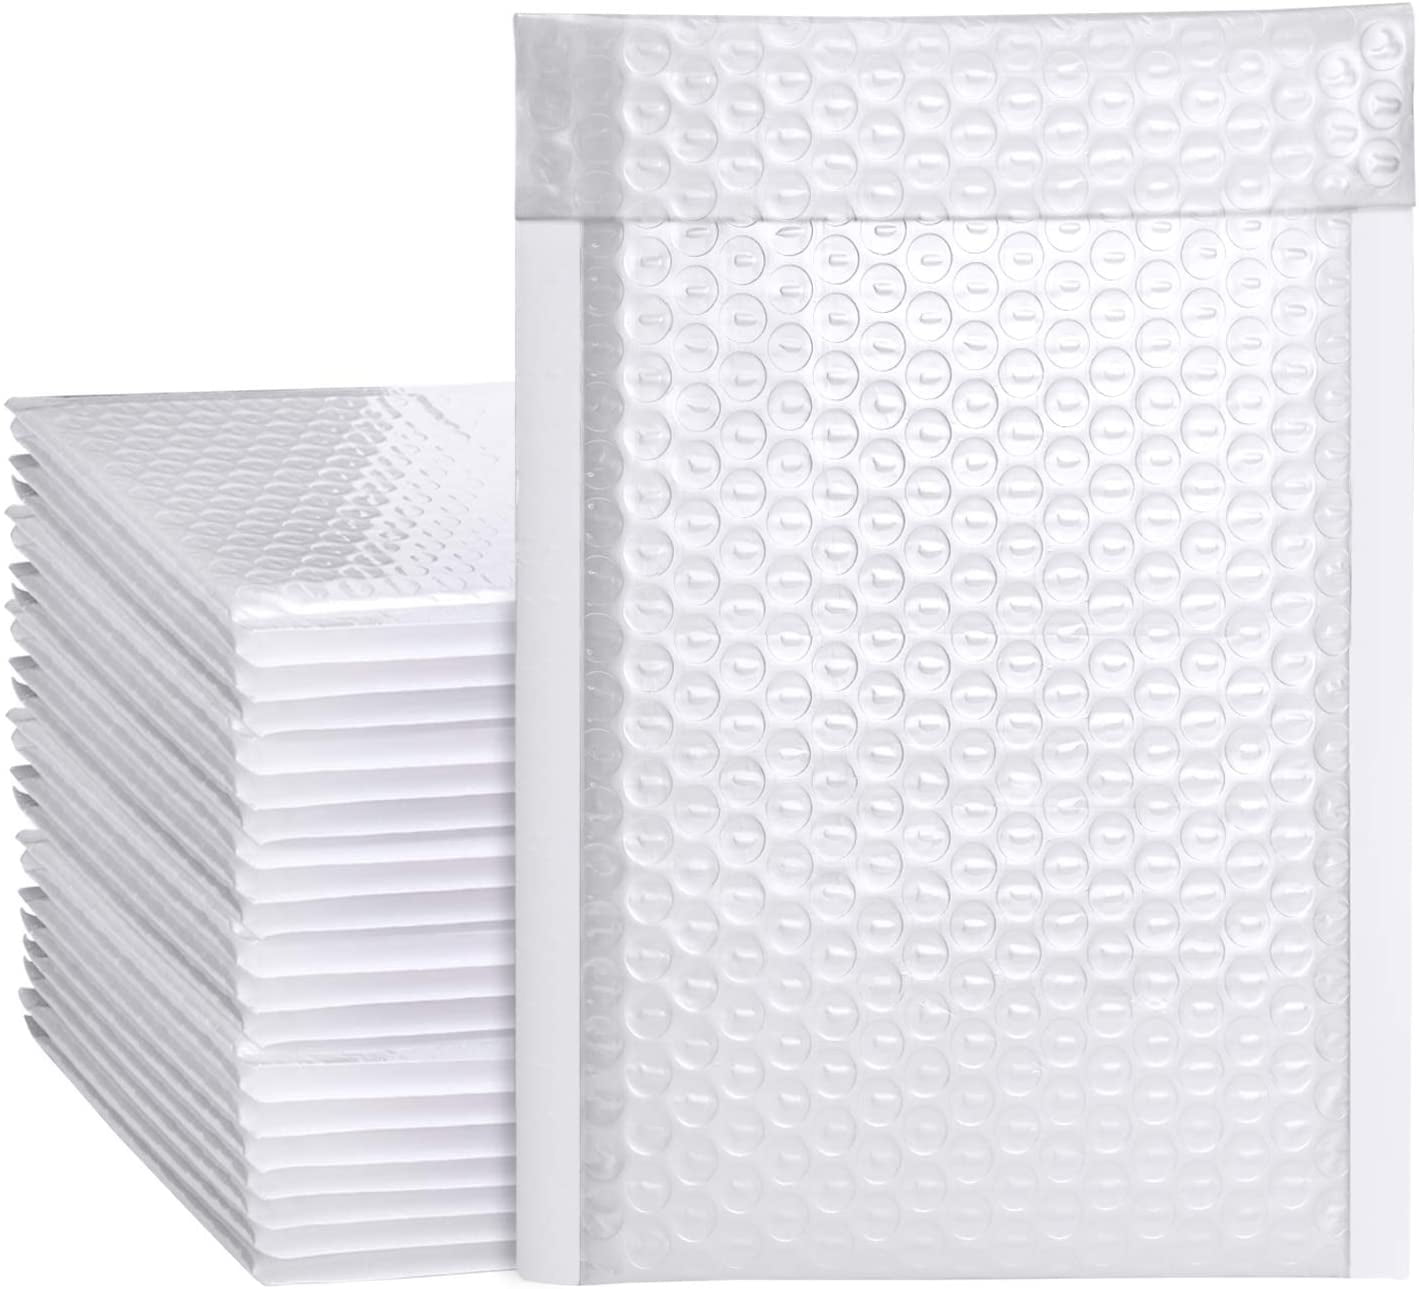 50 #7 14.25x20 Poly Bubble Padded Mailers Envelopes Case Supplies 14.25"x20"